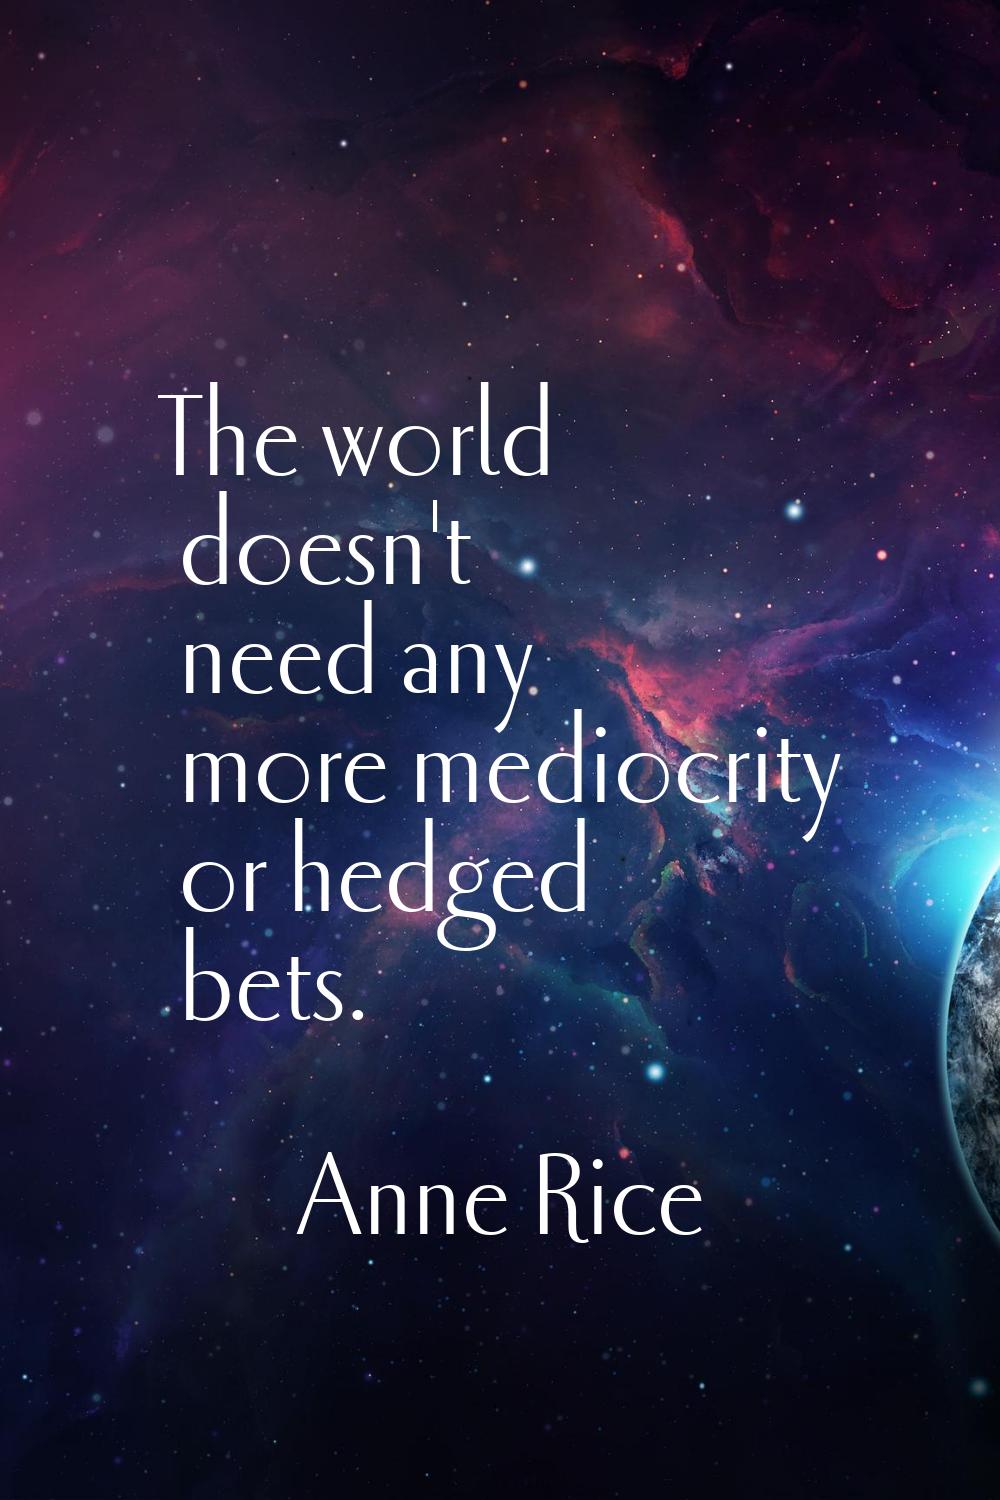 The world doesn't need any more mediocrity or hedged bets.